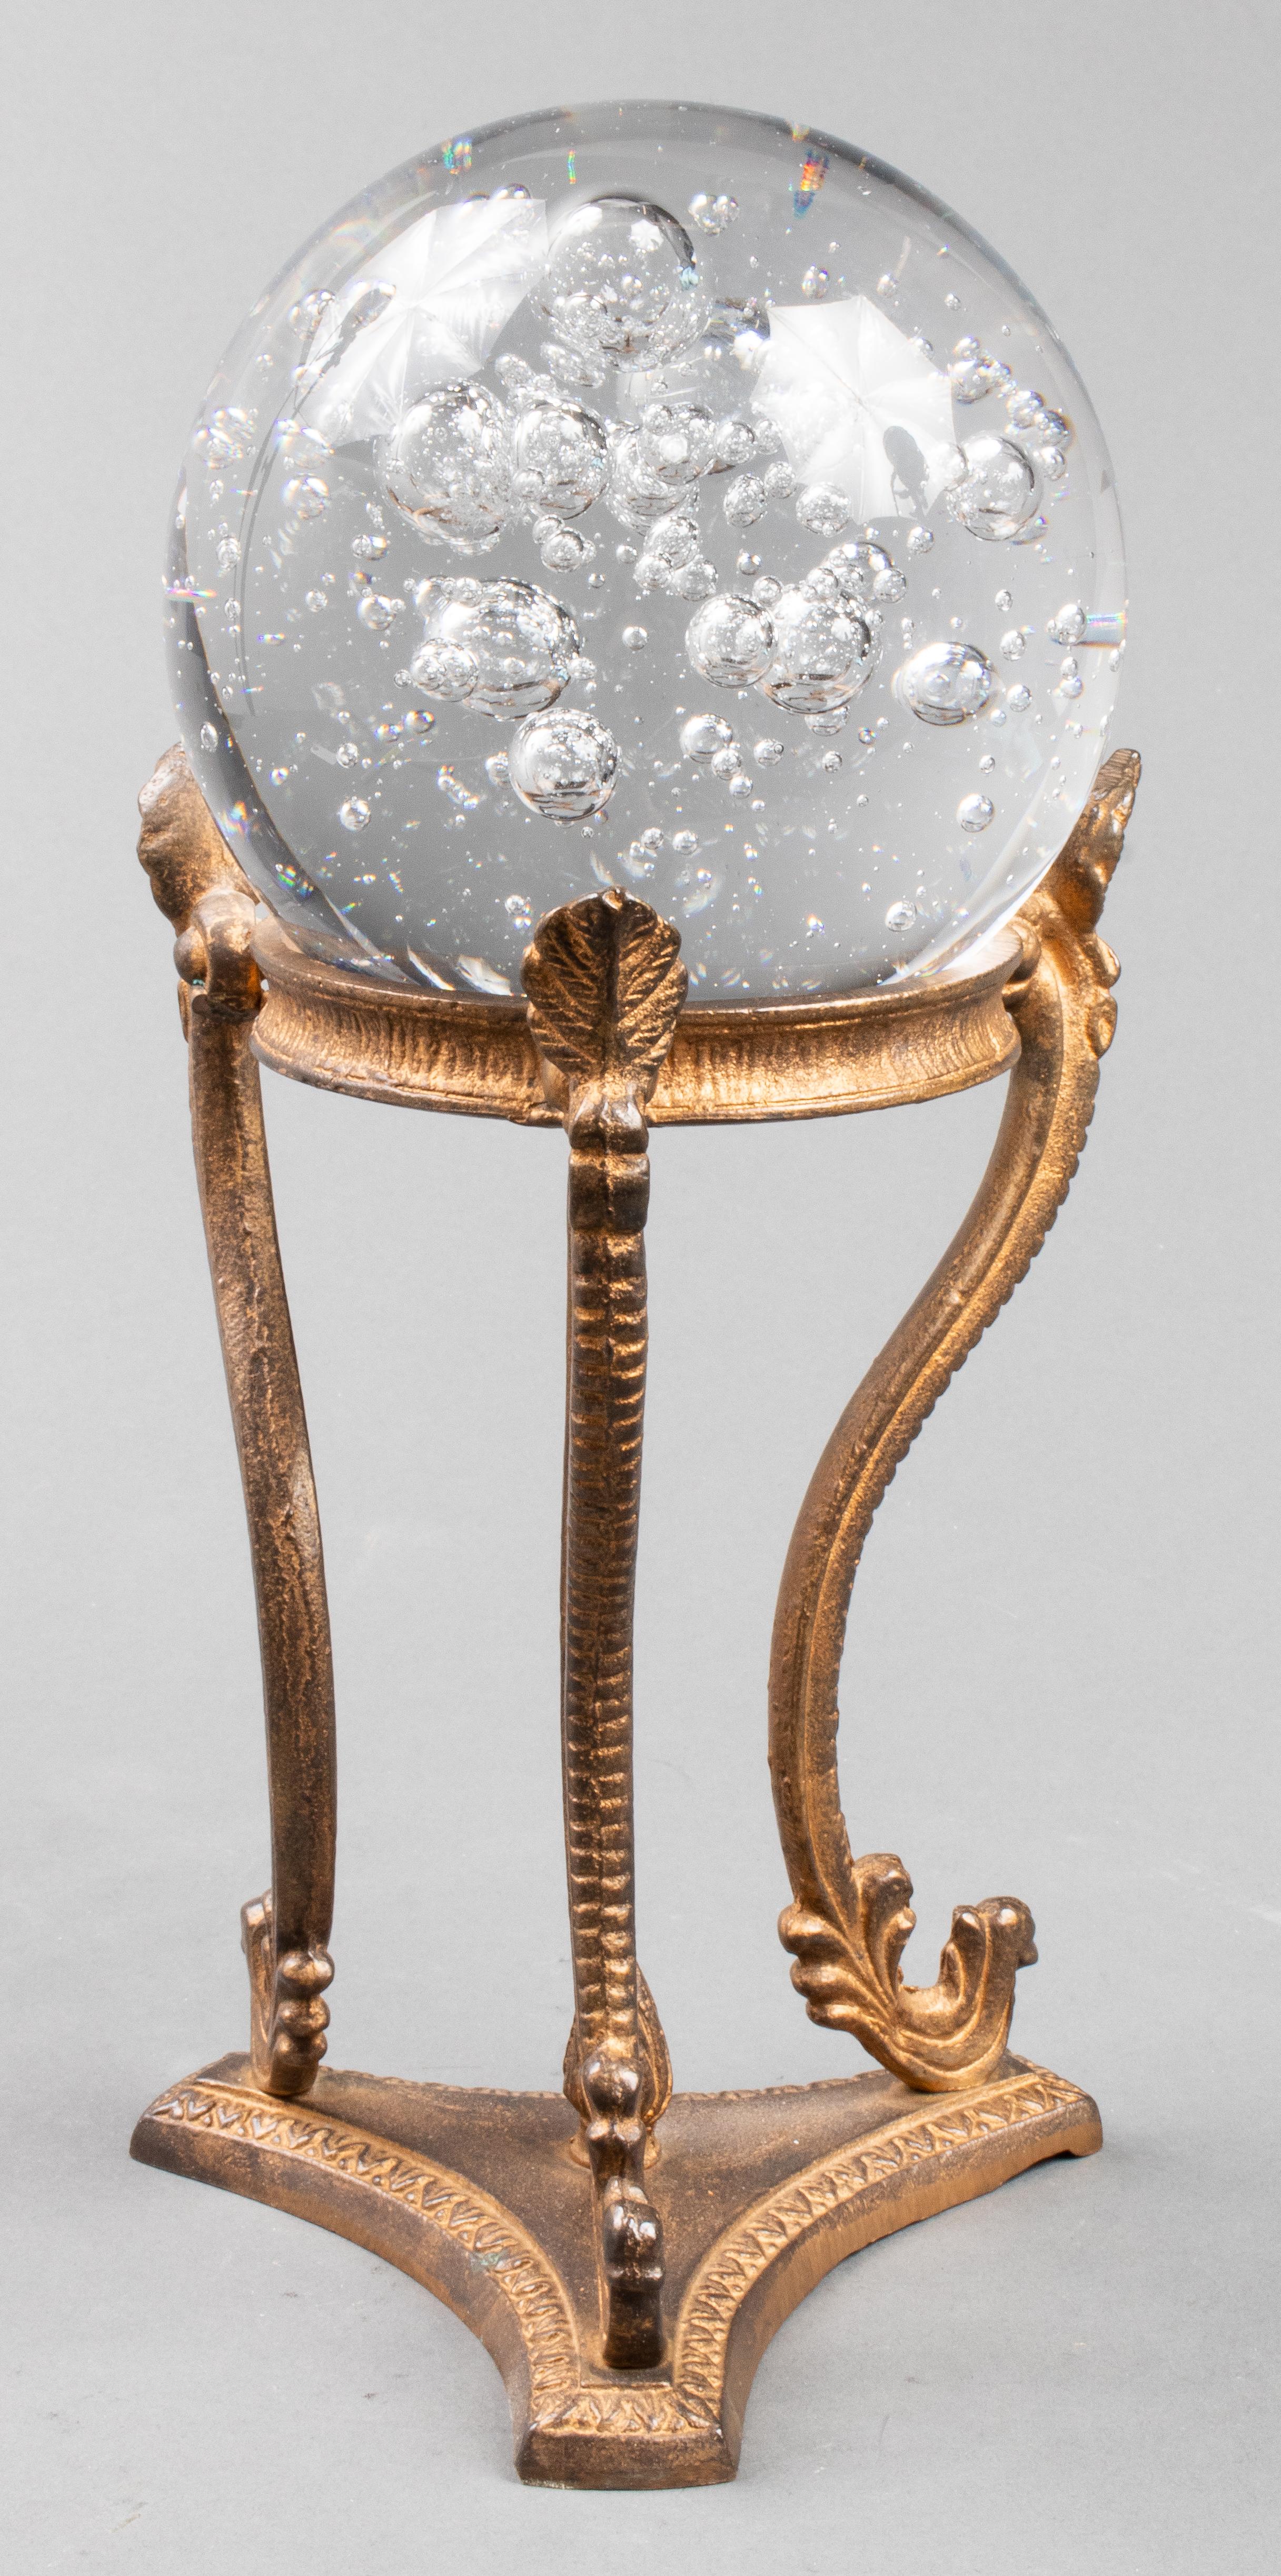 Crystal ball with controlled bubbles, on tripod metal stand with scrolled legs. Measures: Crystal 4.5